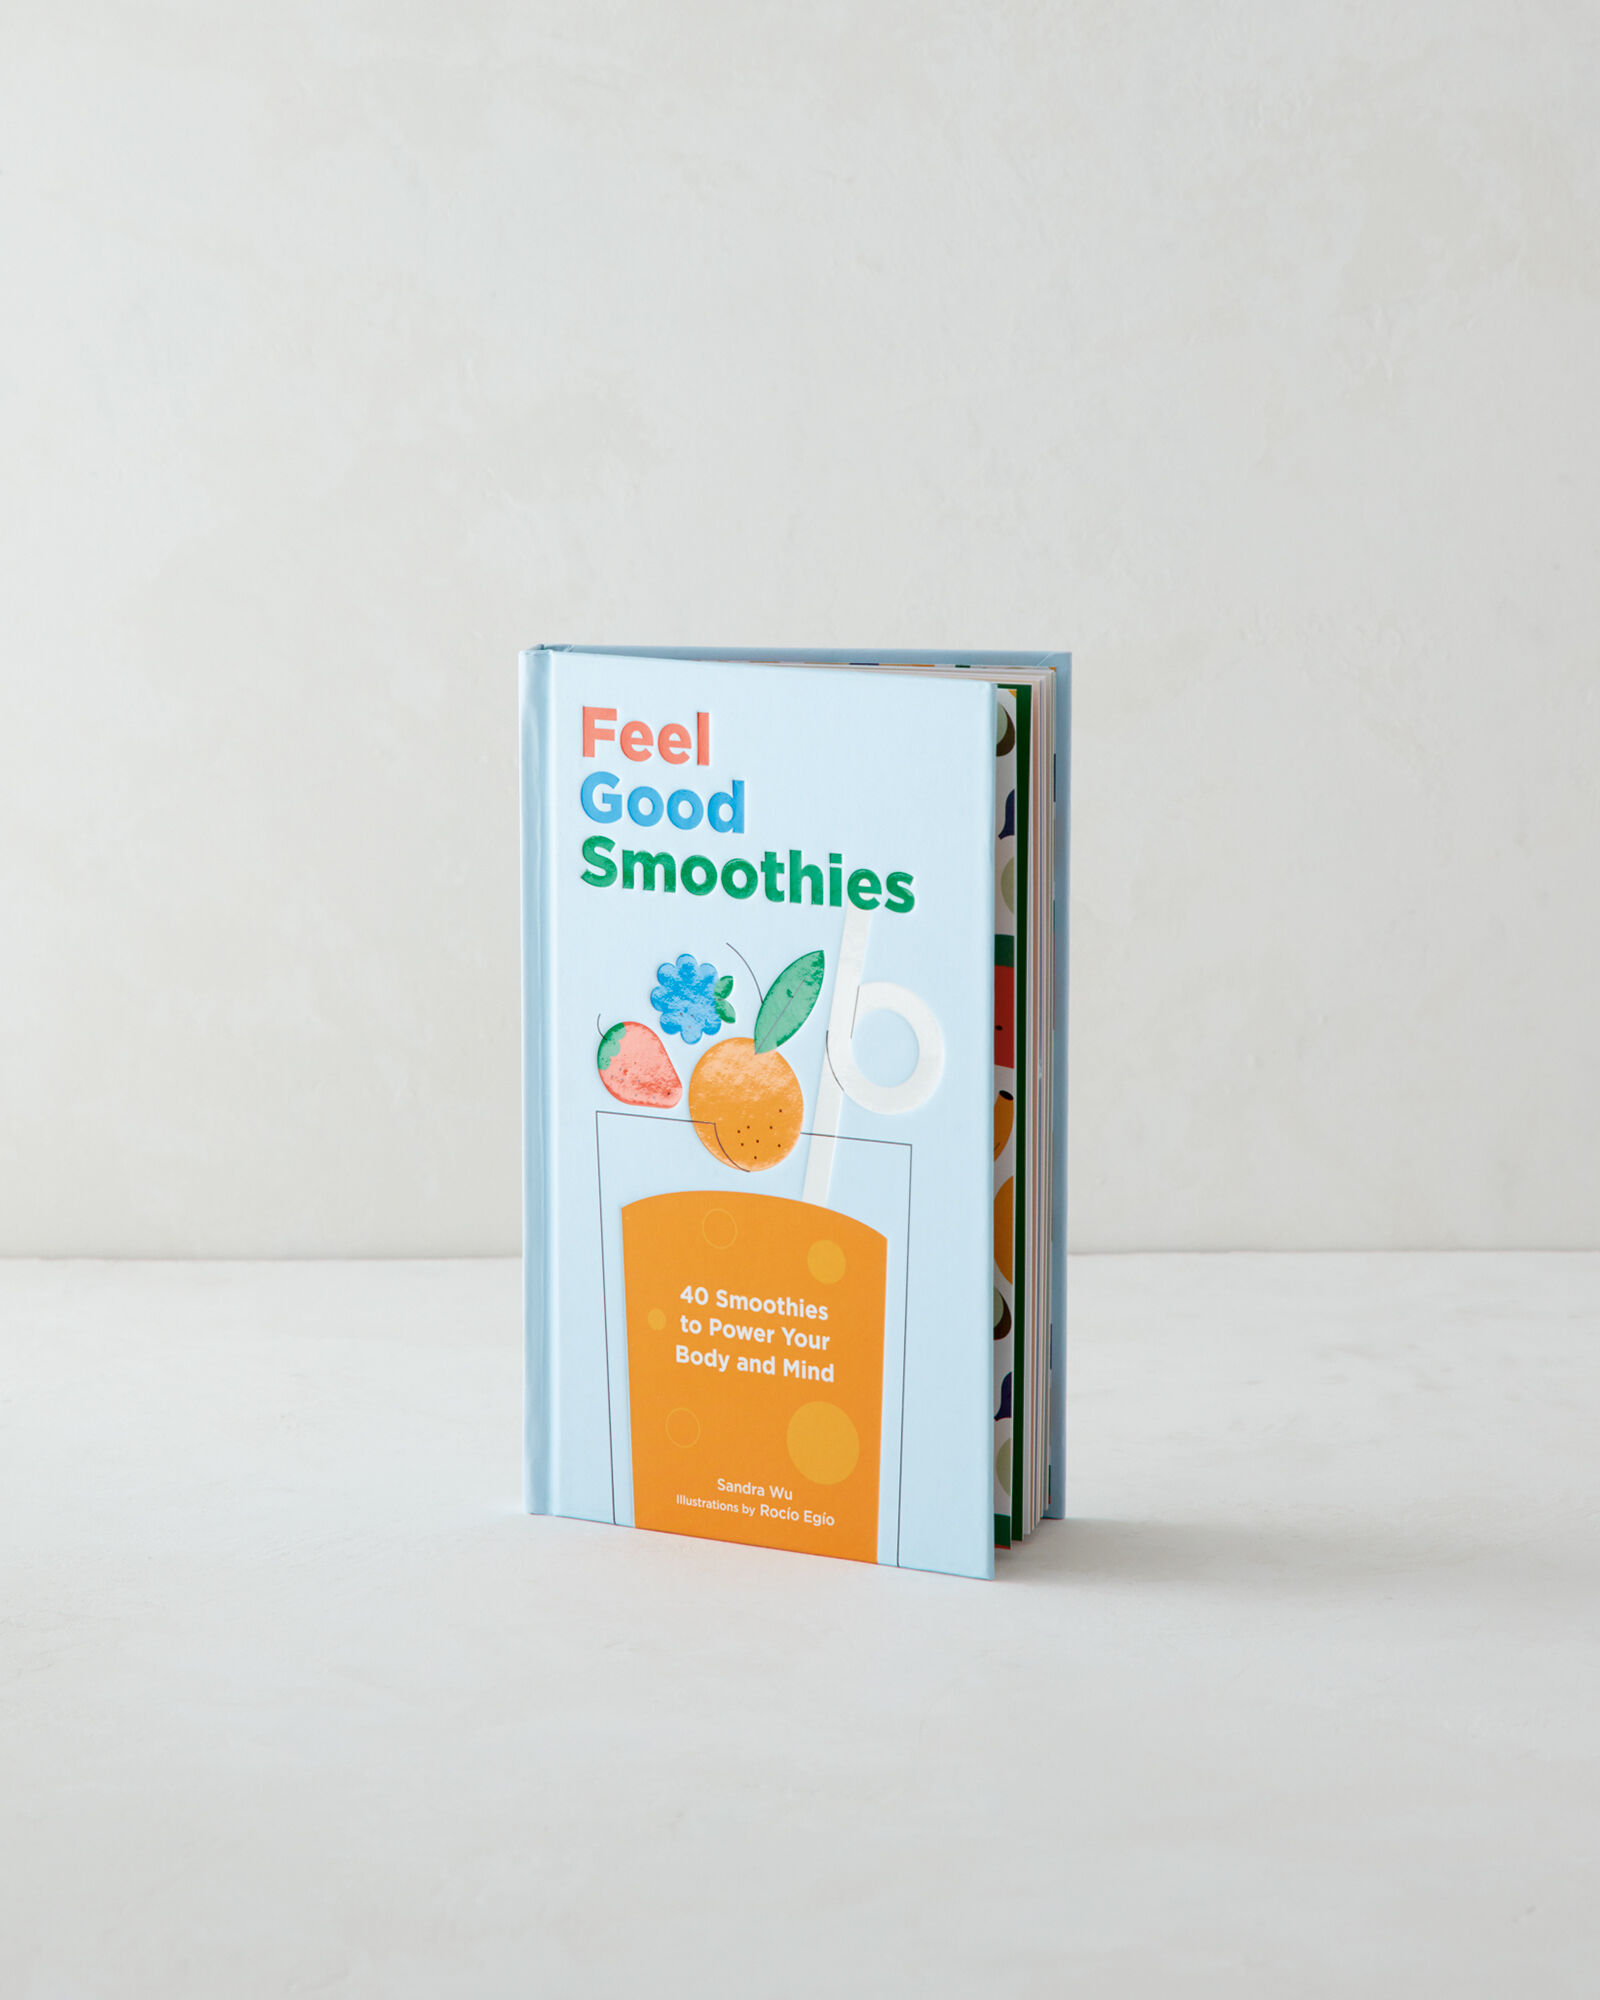 Feel Good Smoothies: 40 Smoothies to Power Your Body and Mind [Book]